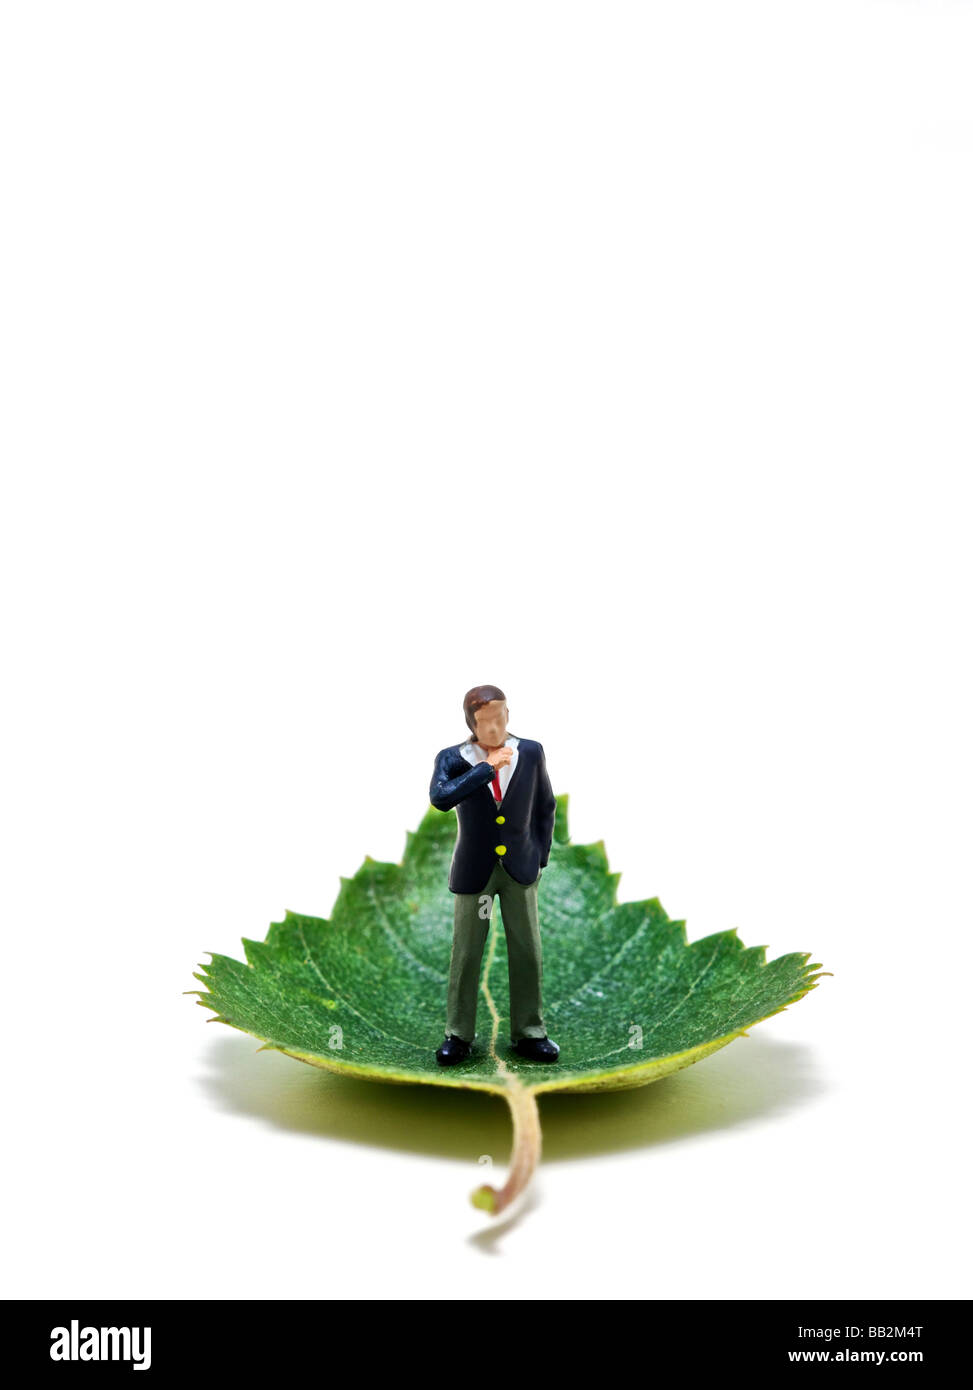 Model business man standing upon a green leaf against a white background in studio Stock Photo